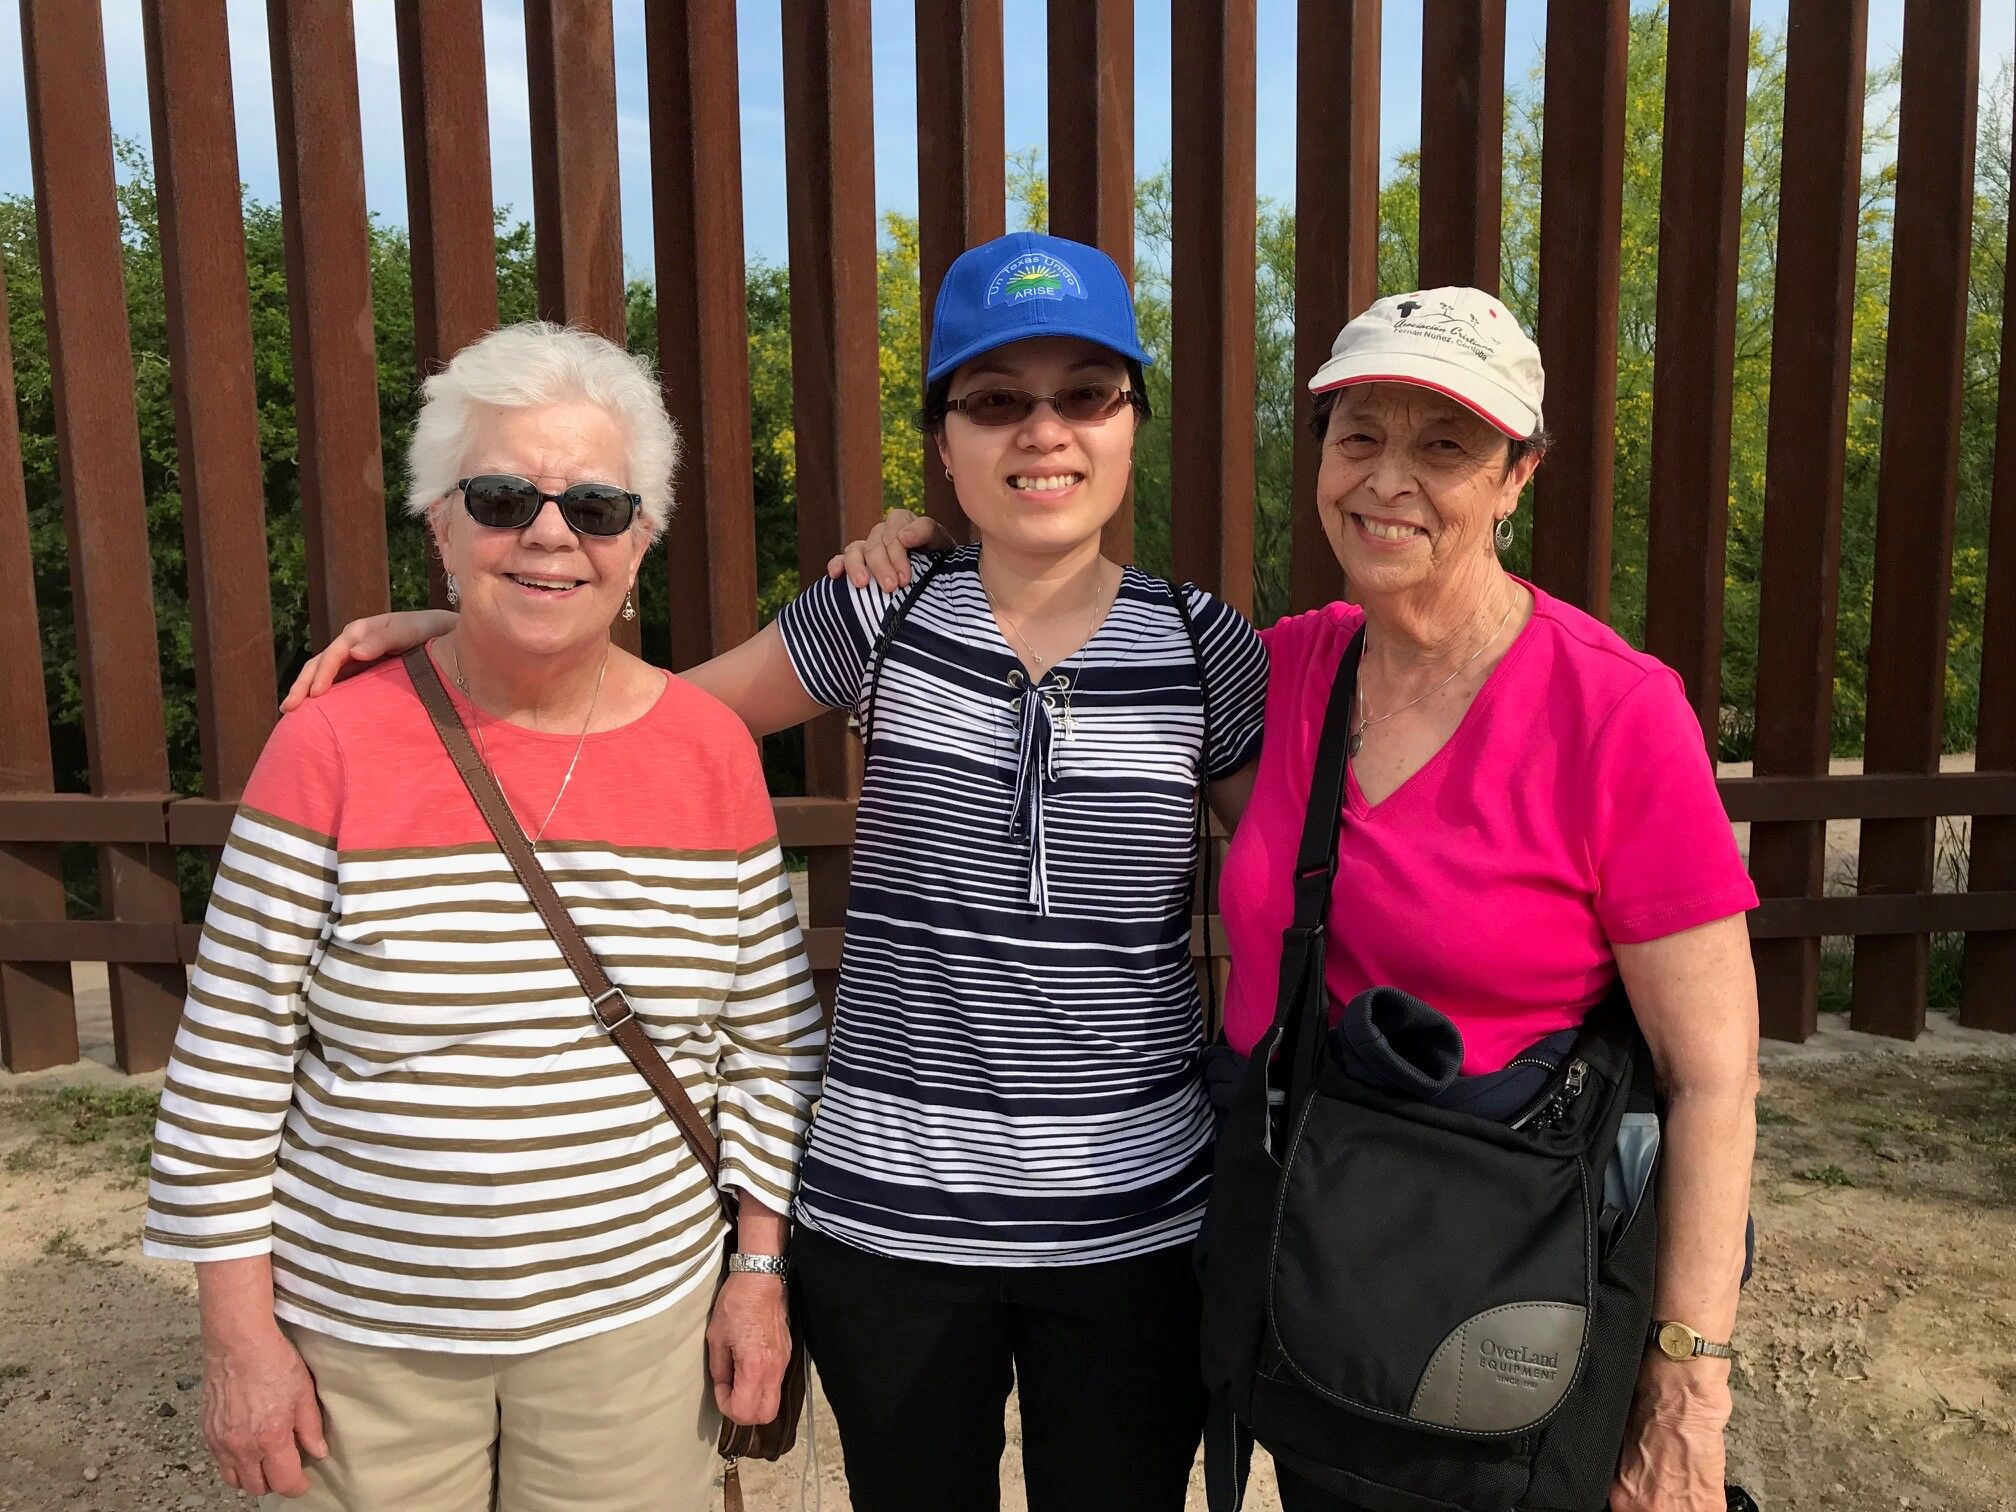 Sisters Joanne Whitaker, Phuong Dong and Marilyn Morgan stand by the border fence in Hidalgo, Texas.